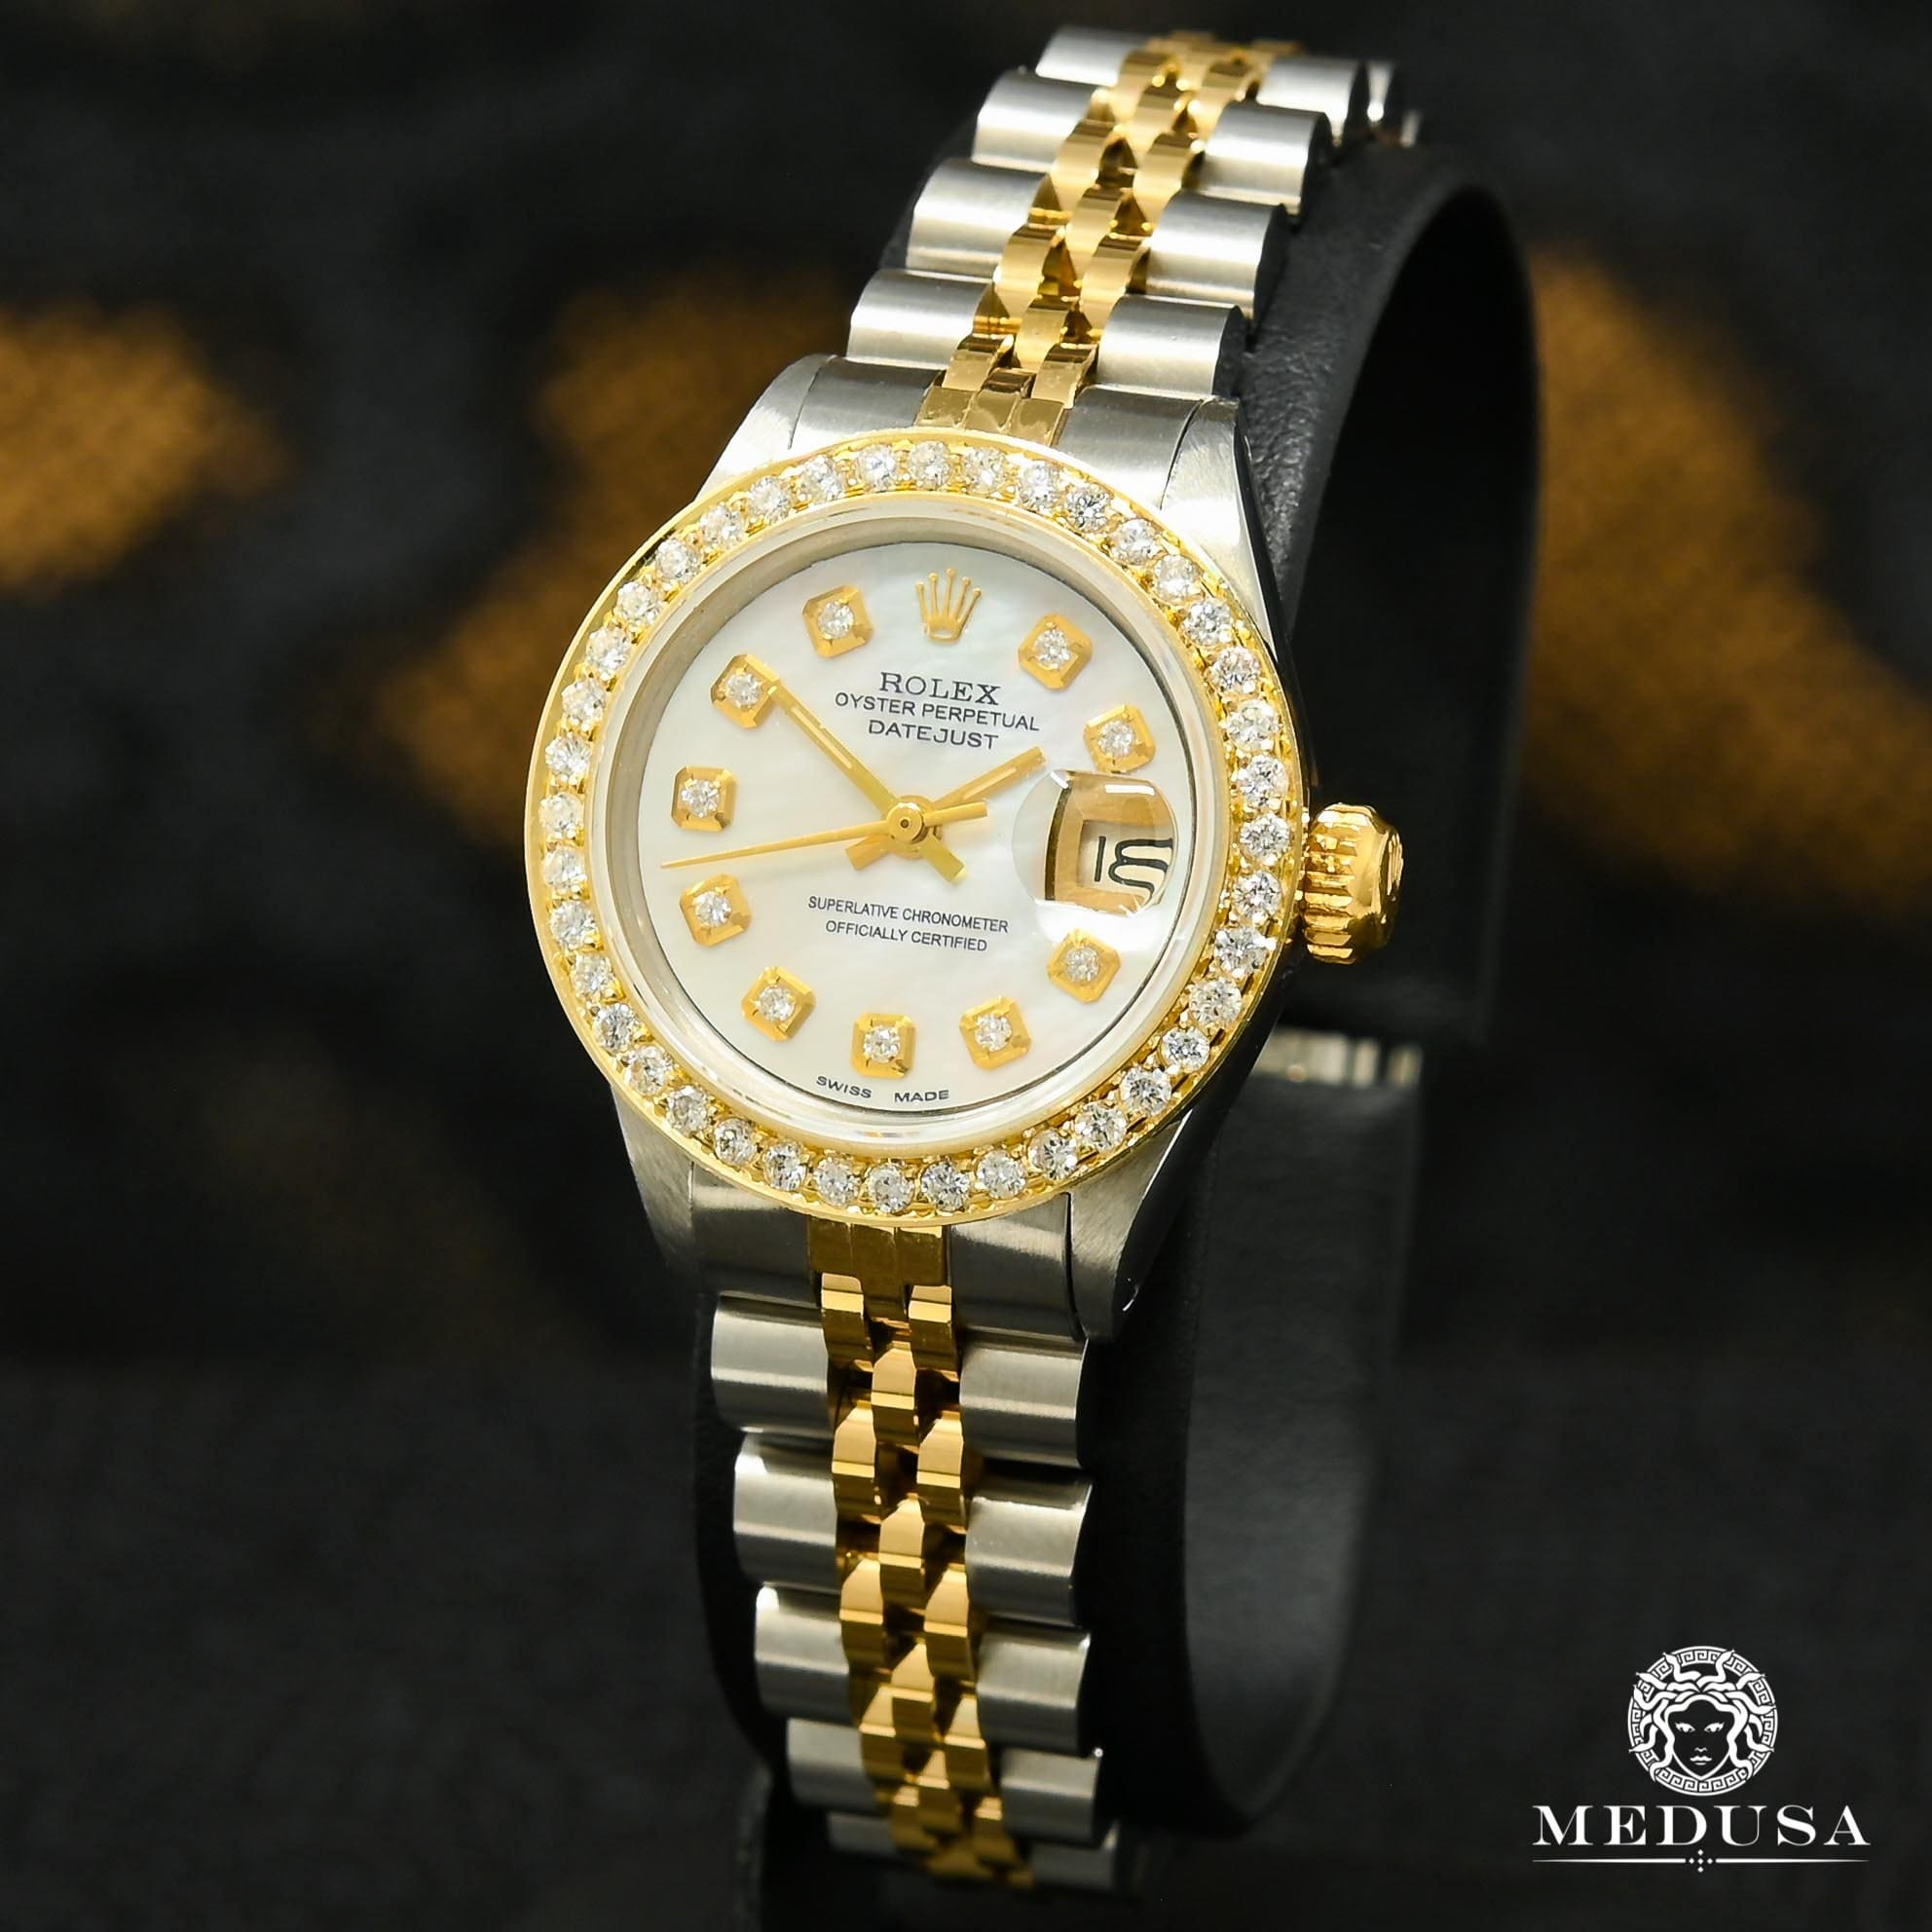 Rolex watch | Rolex Datejust Women's Watch 26mm - White ''Mother of Pearl'' Gold 2 Tones